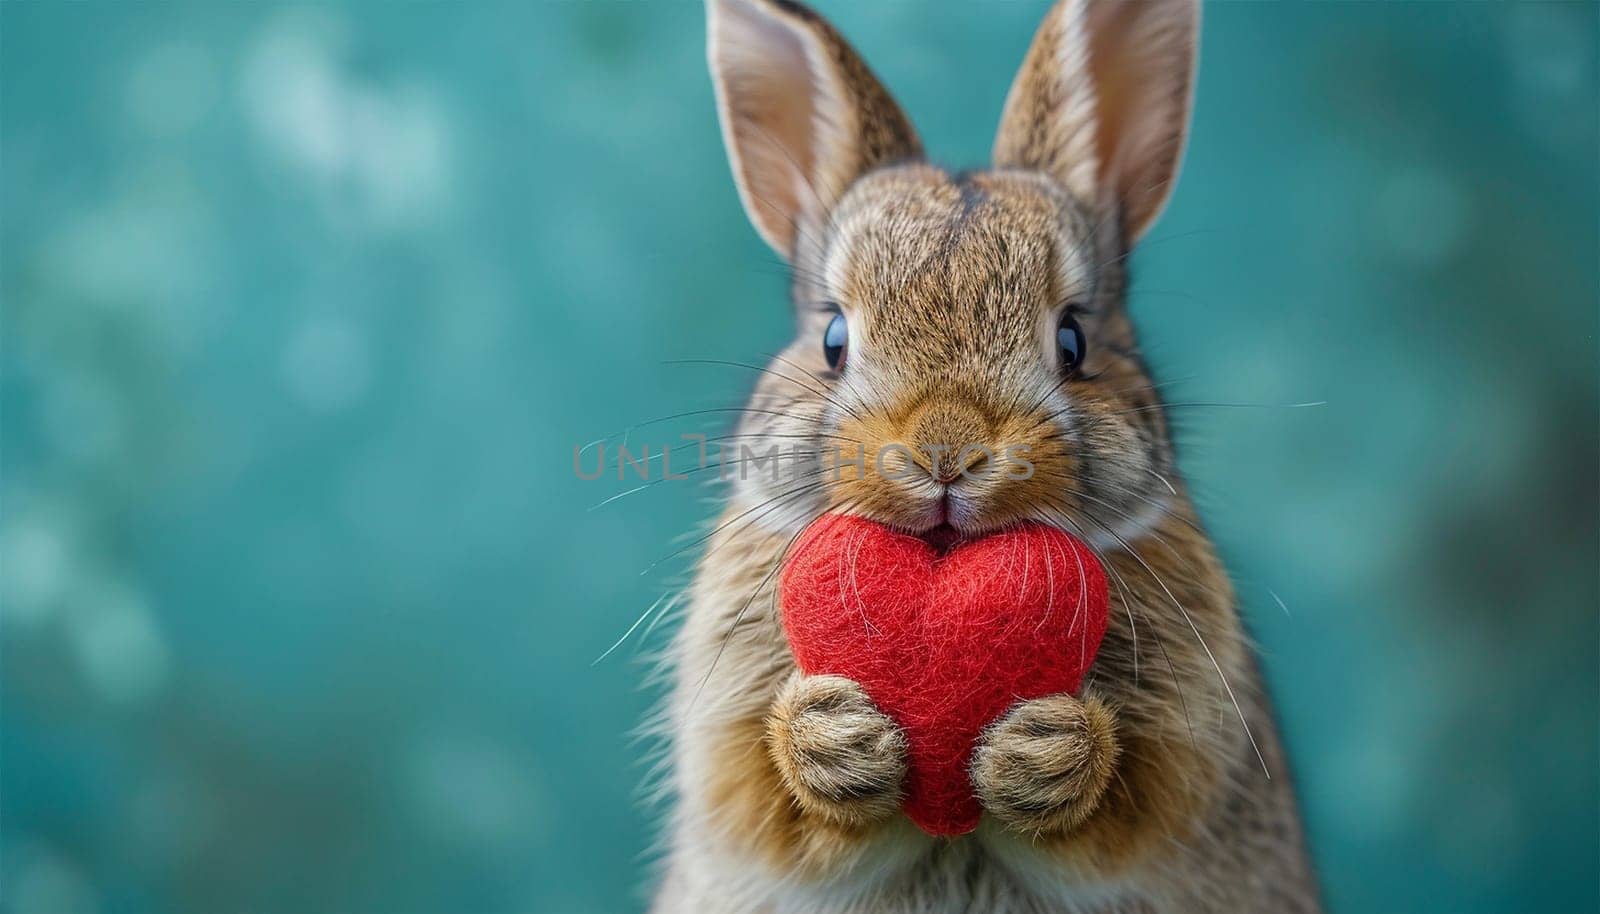 Rabbit with Valentine heart on pastel background. Cute realistic bunny holding red heart. Valentine's day greeting card. Copy space. Happy Valentine's Day by Annebel146